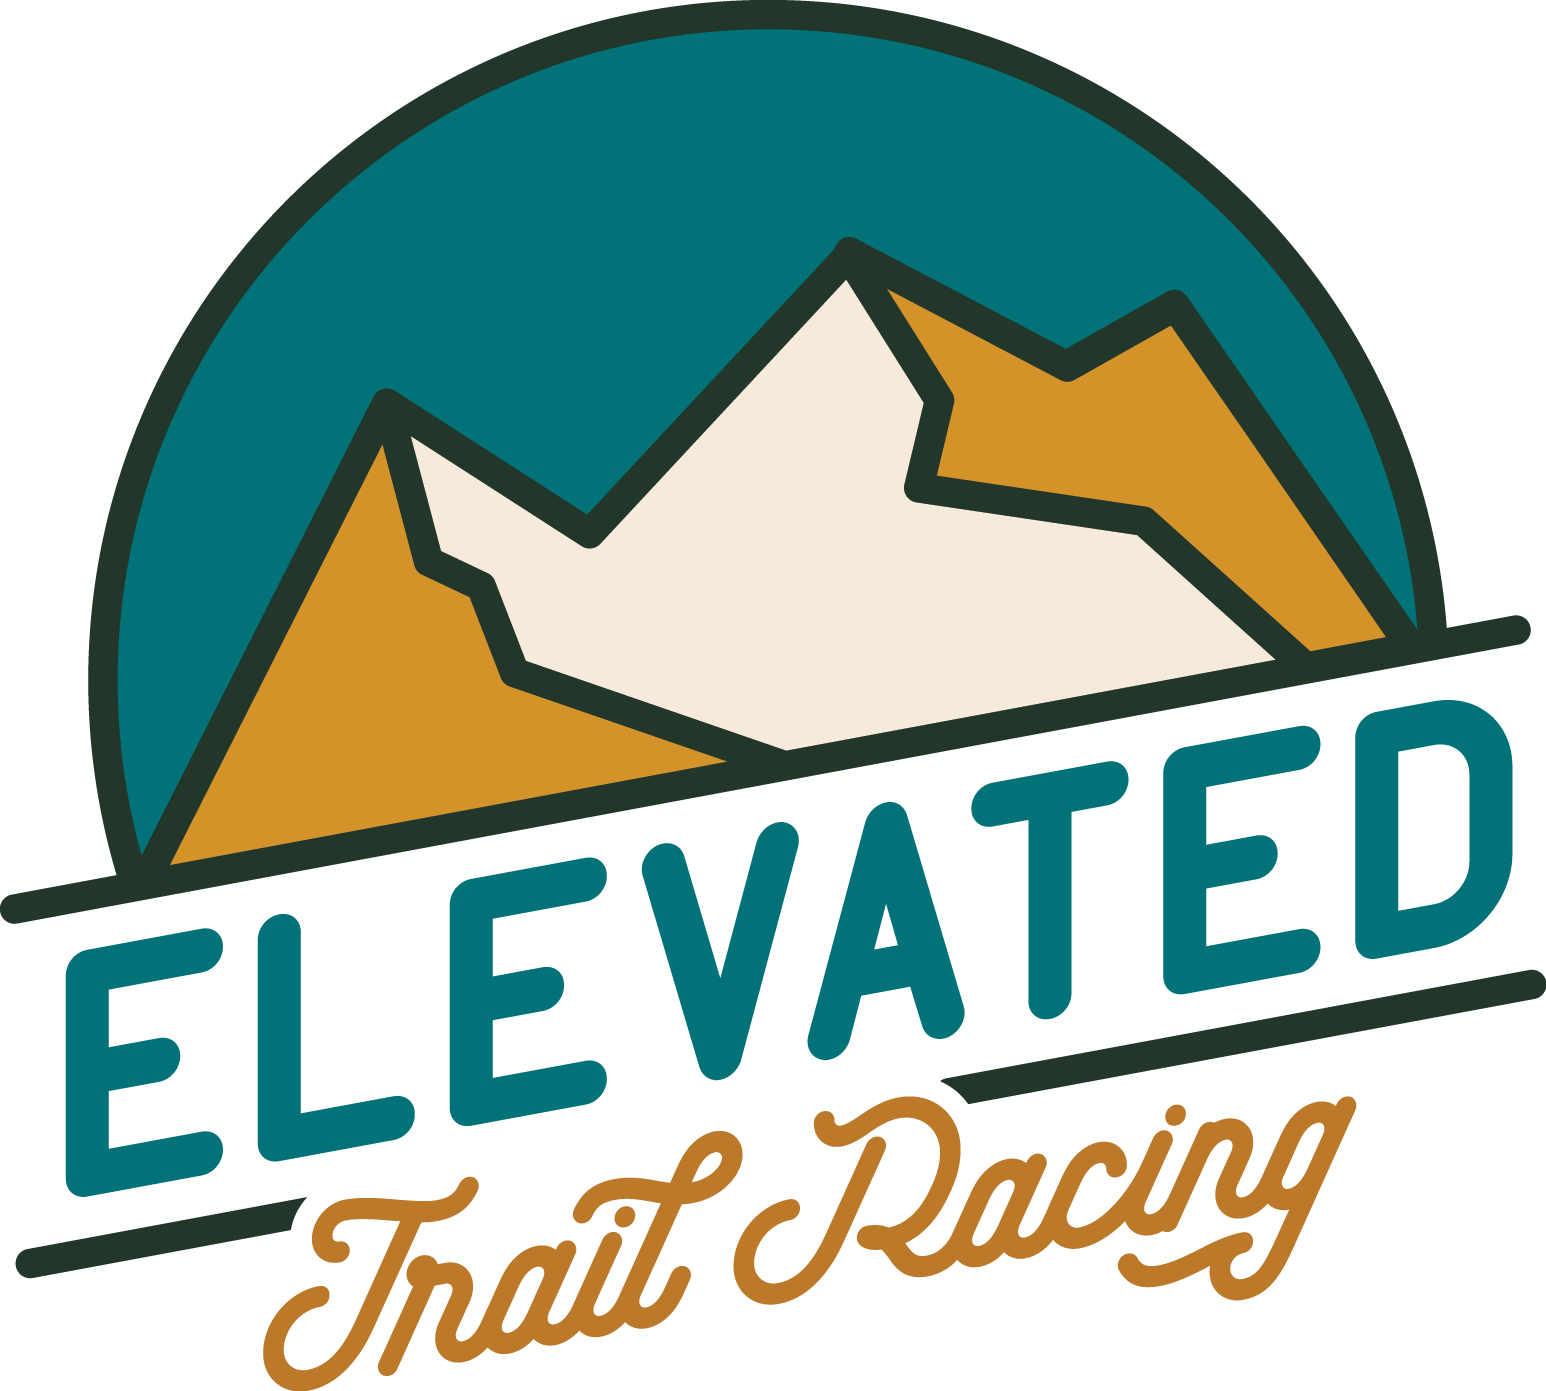 Elevated Trail Racing